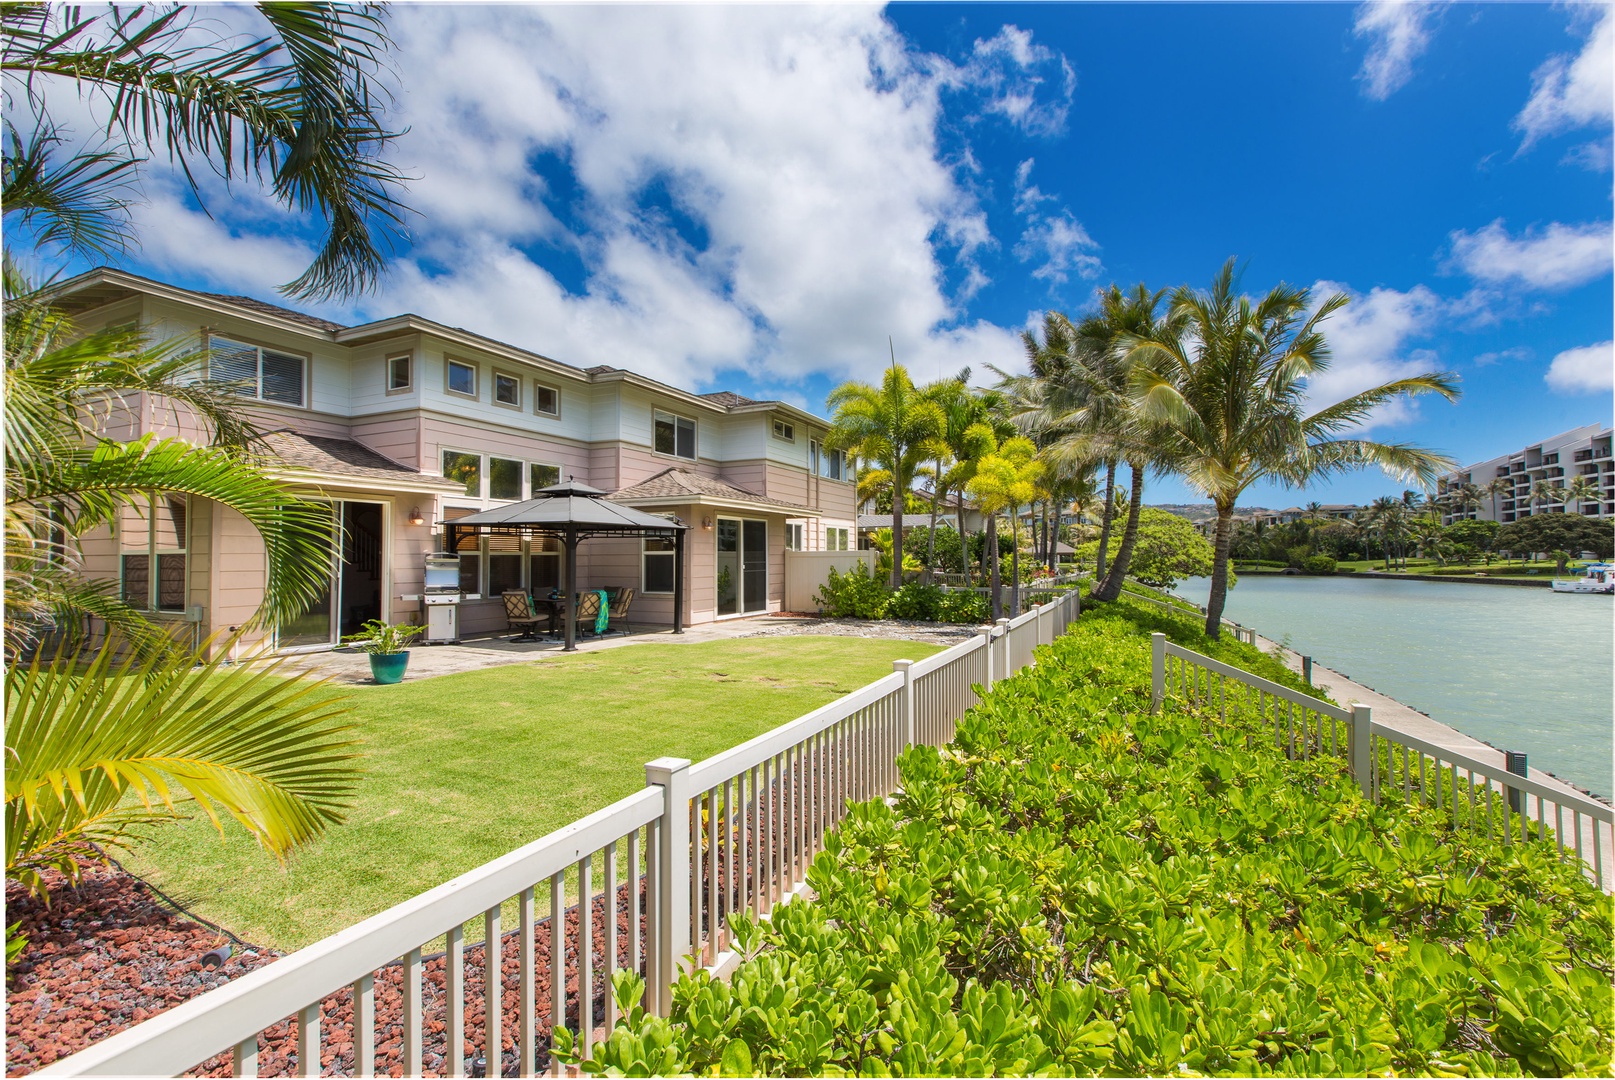 Honolulu Vacation Rentals, Ohana Kai - Step into your tropical oasis from the back door and explore the marina through your private gateway.